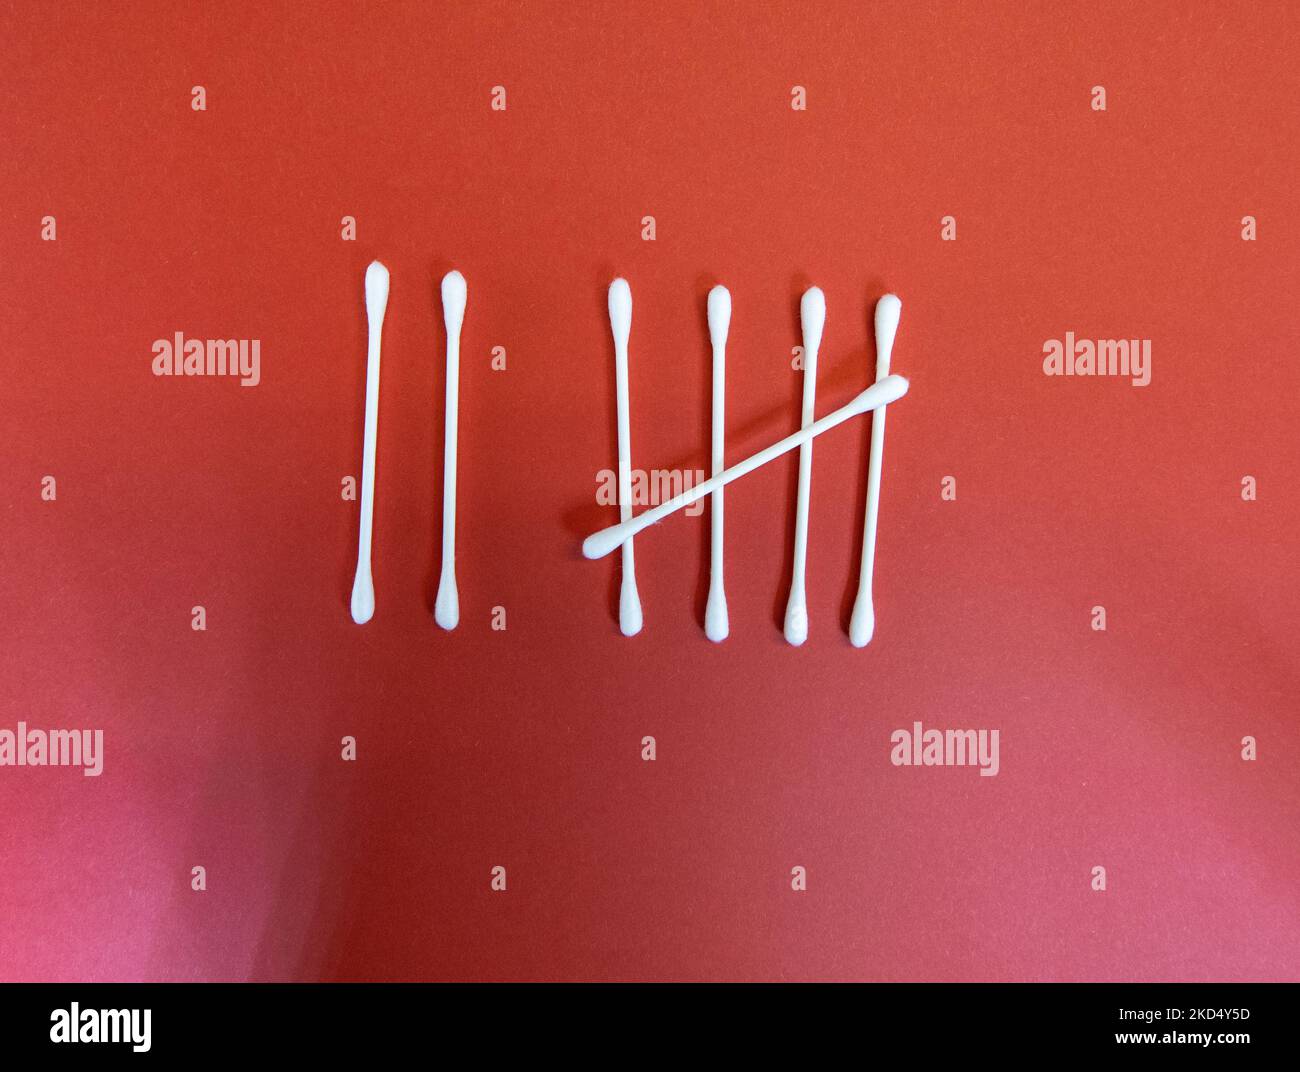 the number seven (7) in Tally marks or hash marks with clean white cotton buds isolated on a dark red background Stock Photo